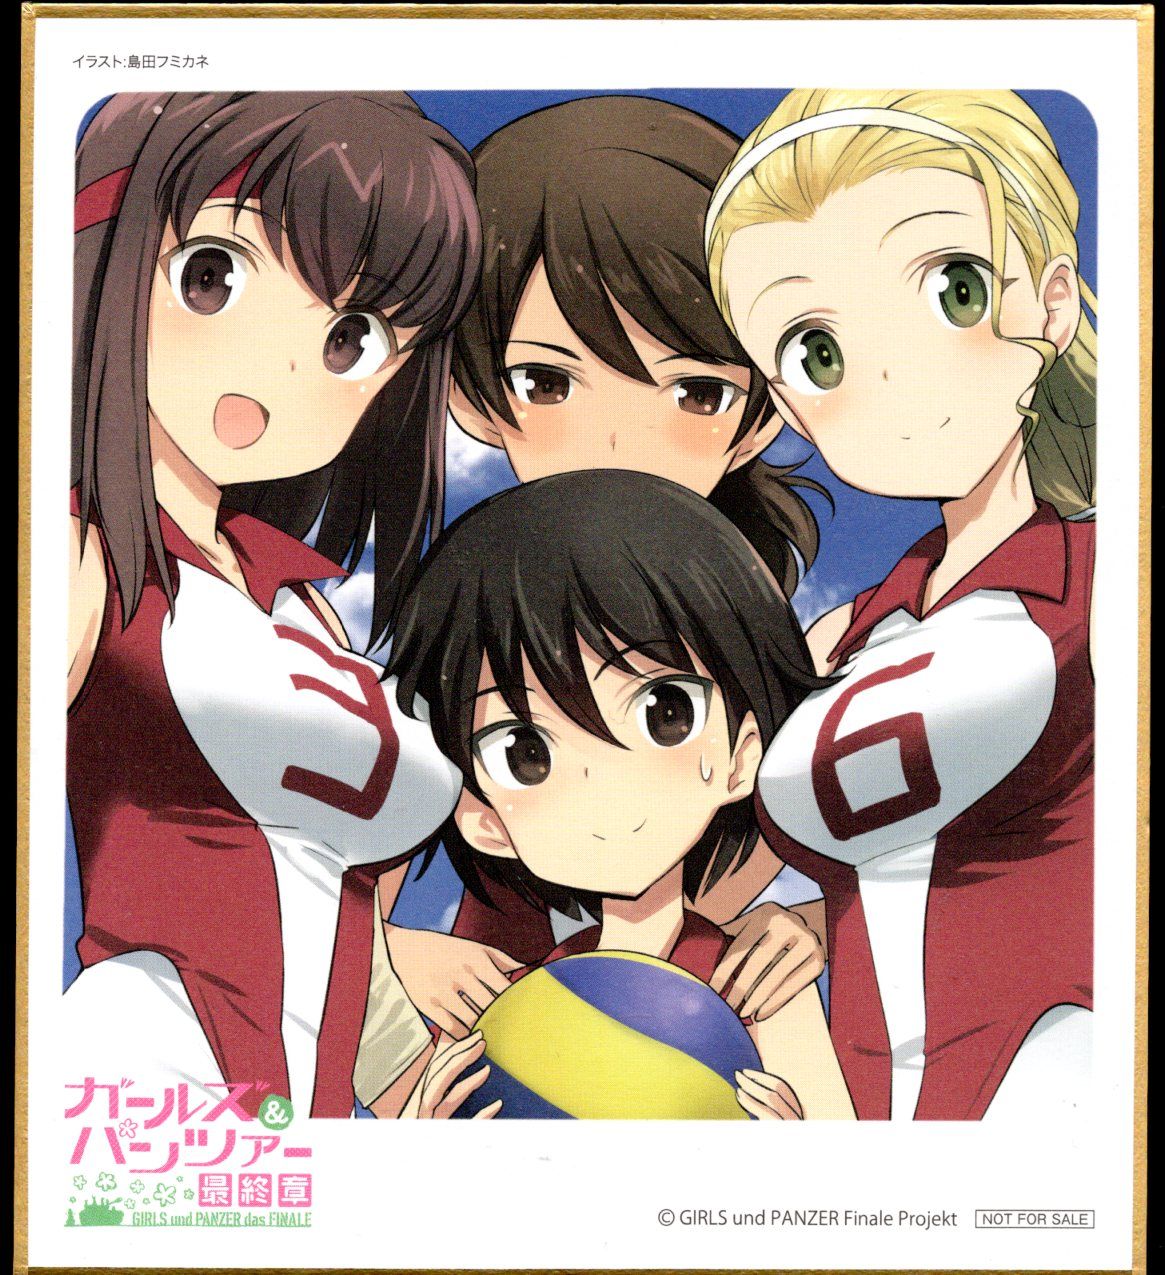 【Image】The most erotic club activity is the women's volleyball club wwwwww 11